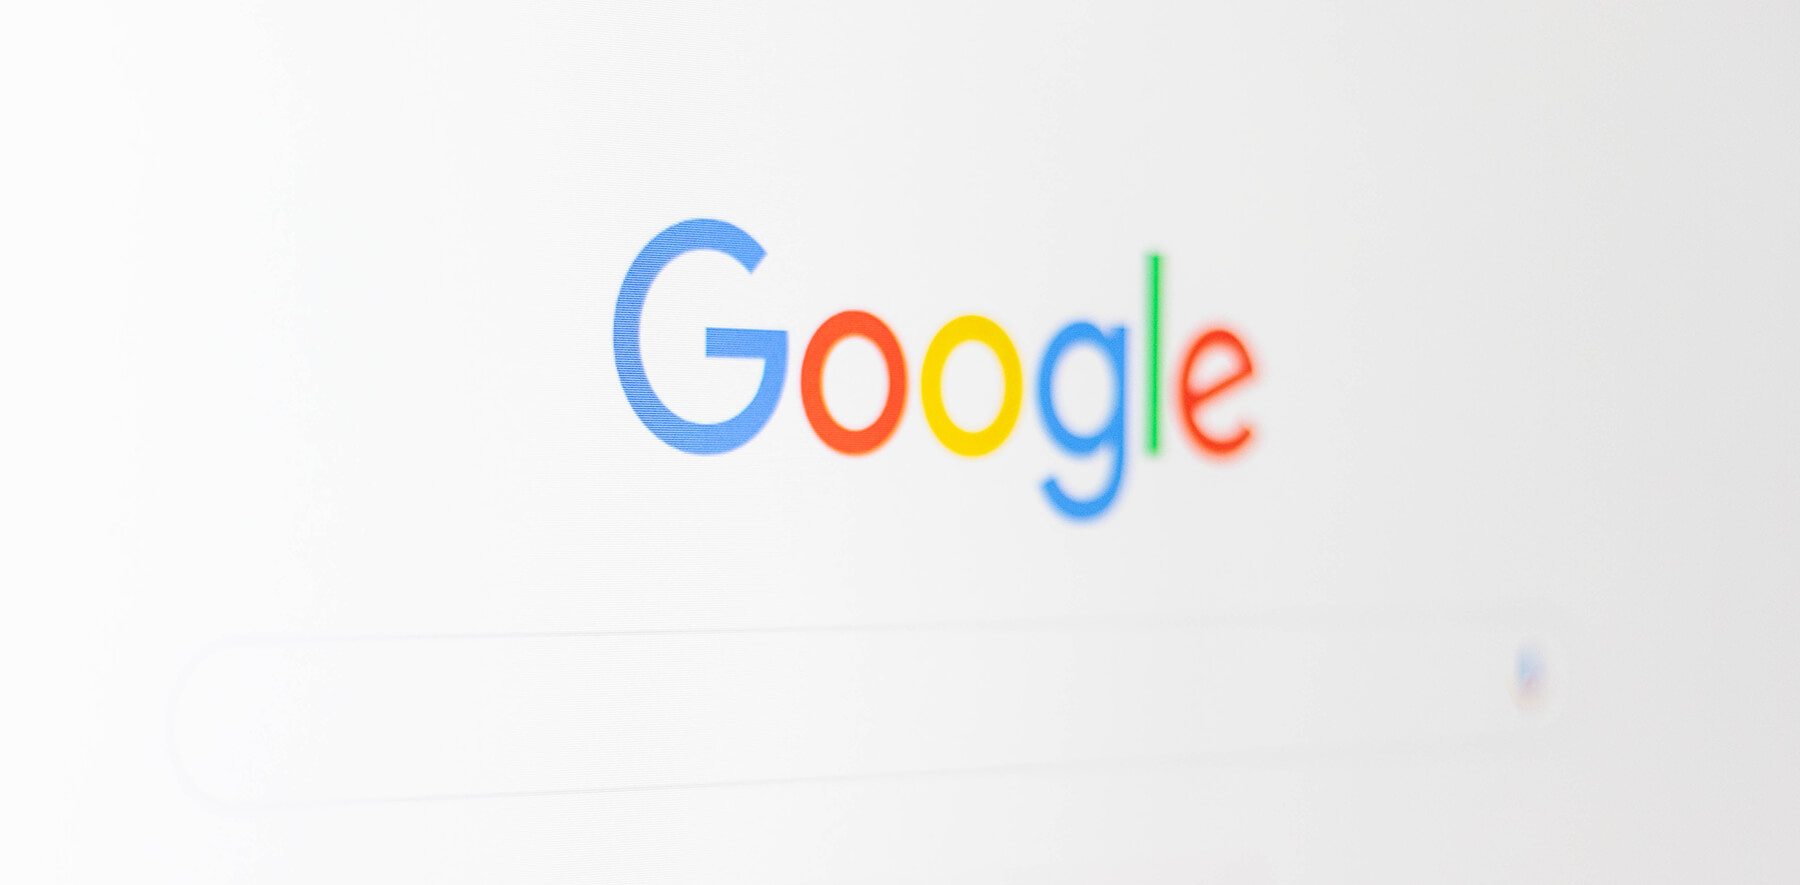 5 Google Ad Tips to Double Your Conversion Rate